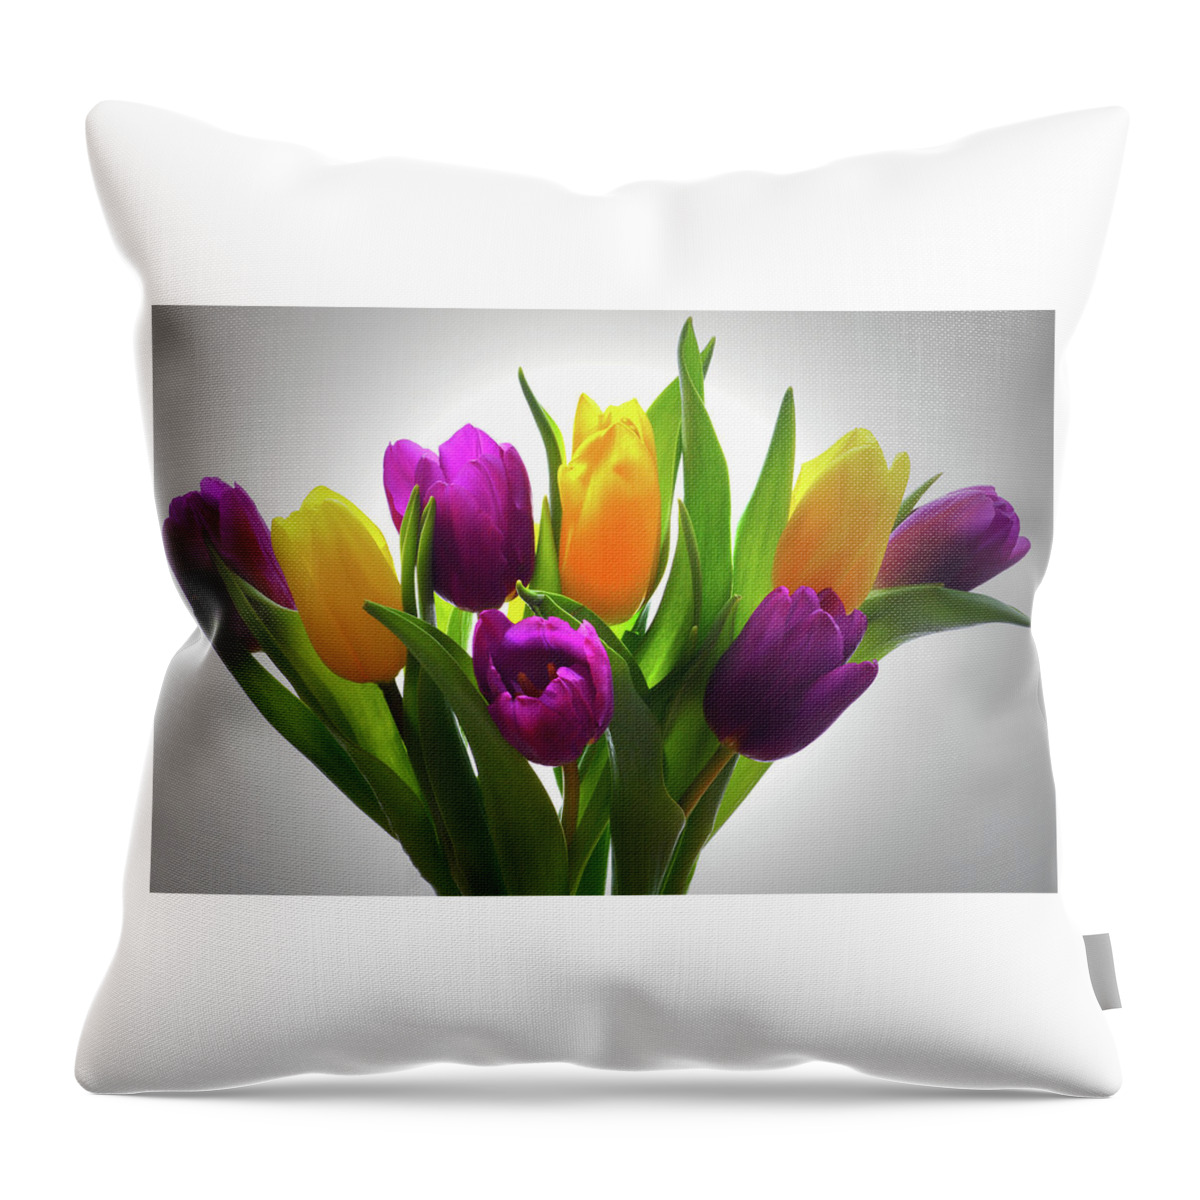 Tulips Throw Pillow featuring the photograph Spring Tulips by Terence Davis